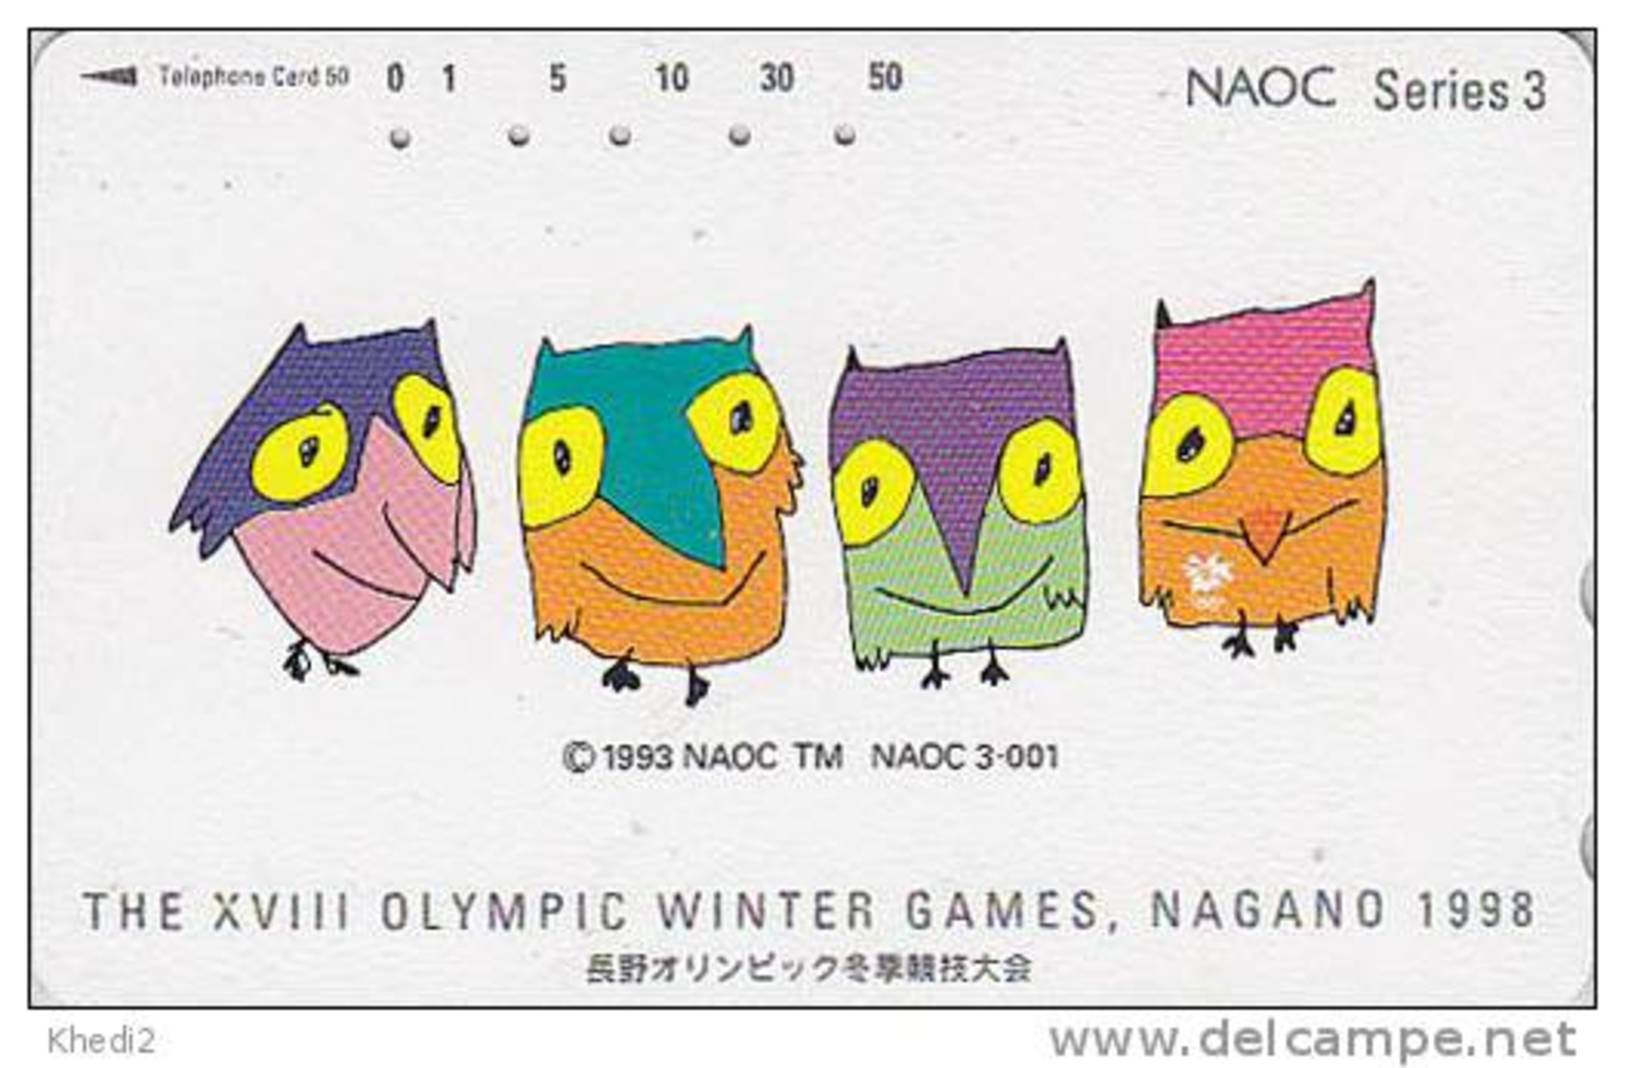 TC JAPON / 270-01680 - HIBOU Jeux Olympiques NAGANO - OWL Bird OLYMPIC GAMES JAPAN Free Phonecard - EULE - 3920 - Olympic Games